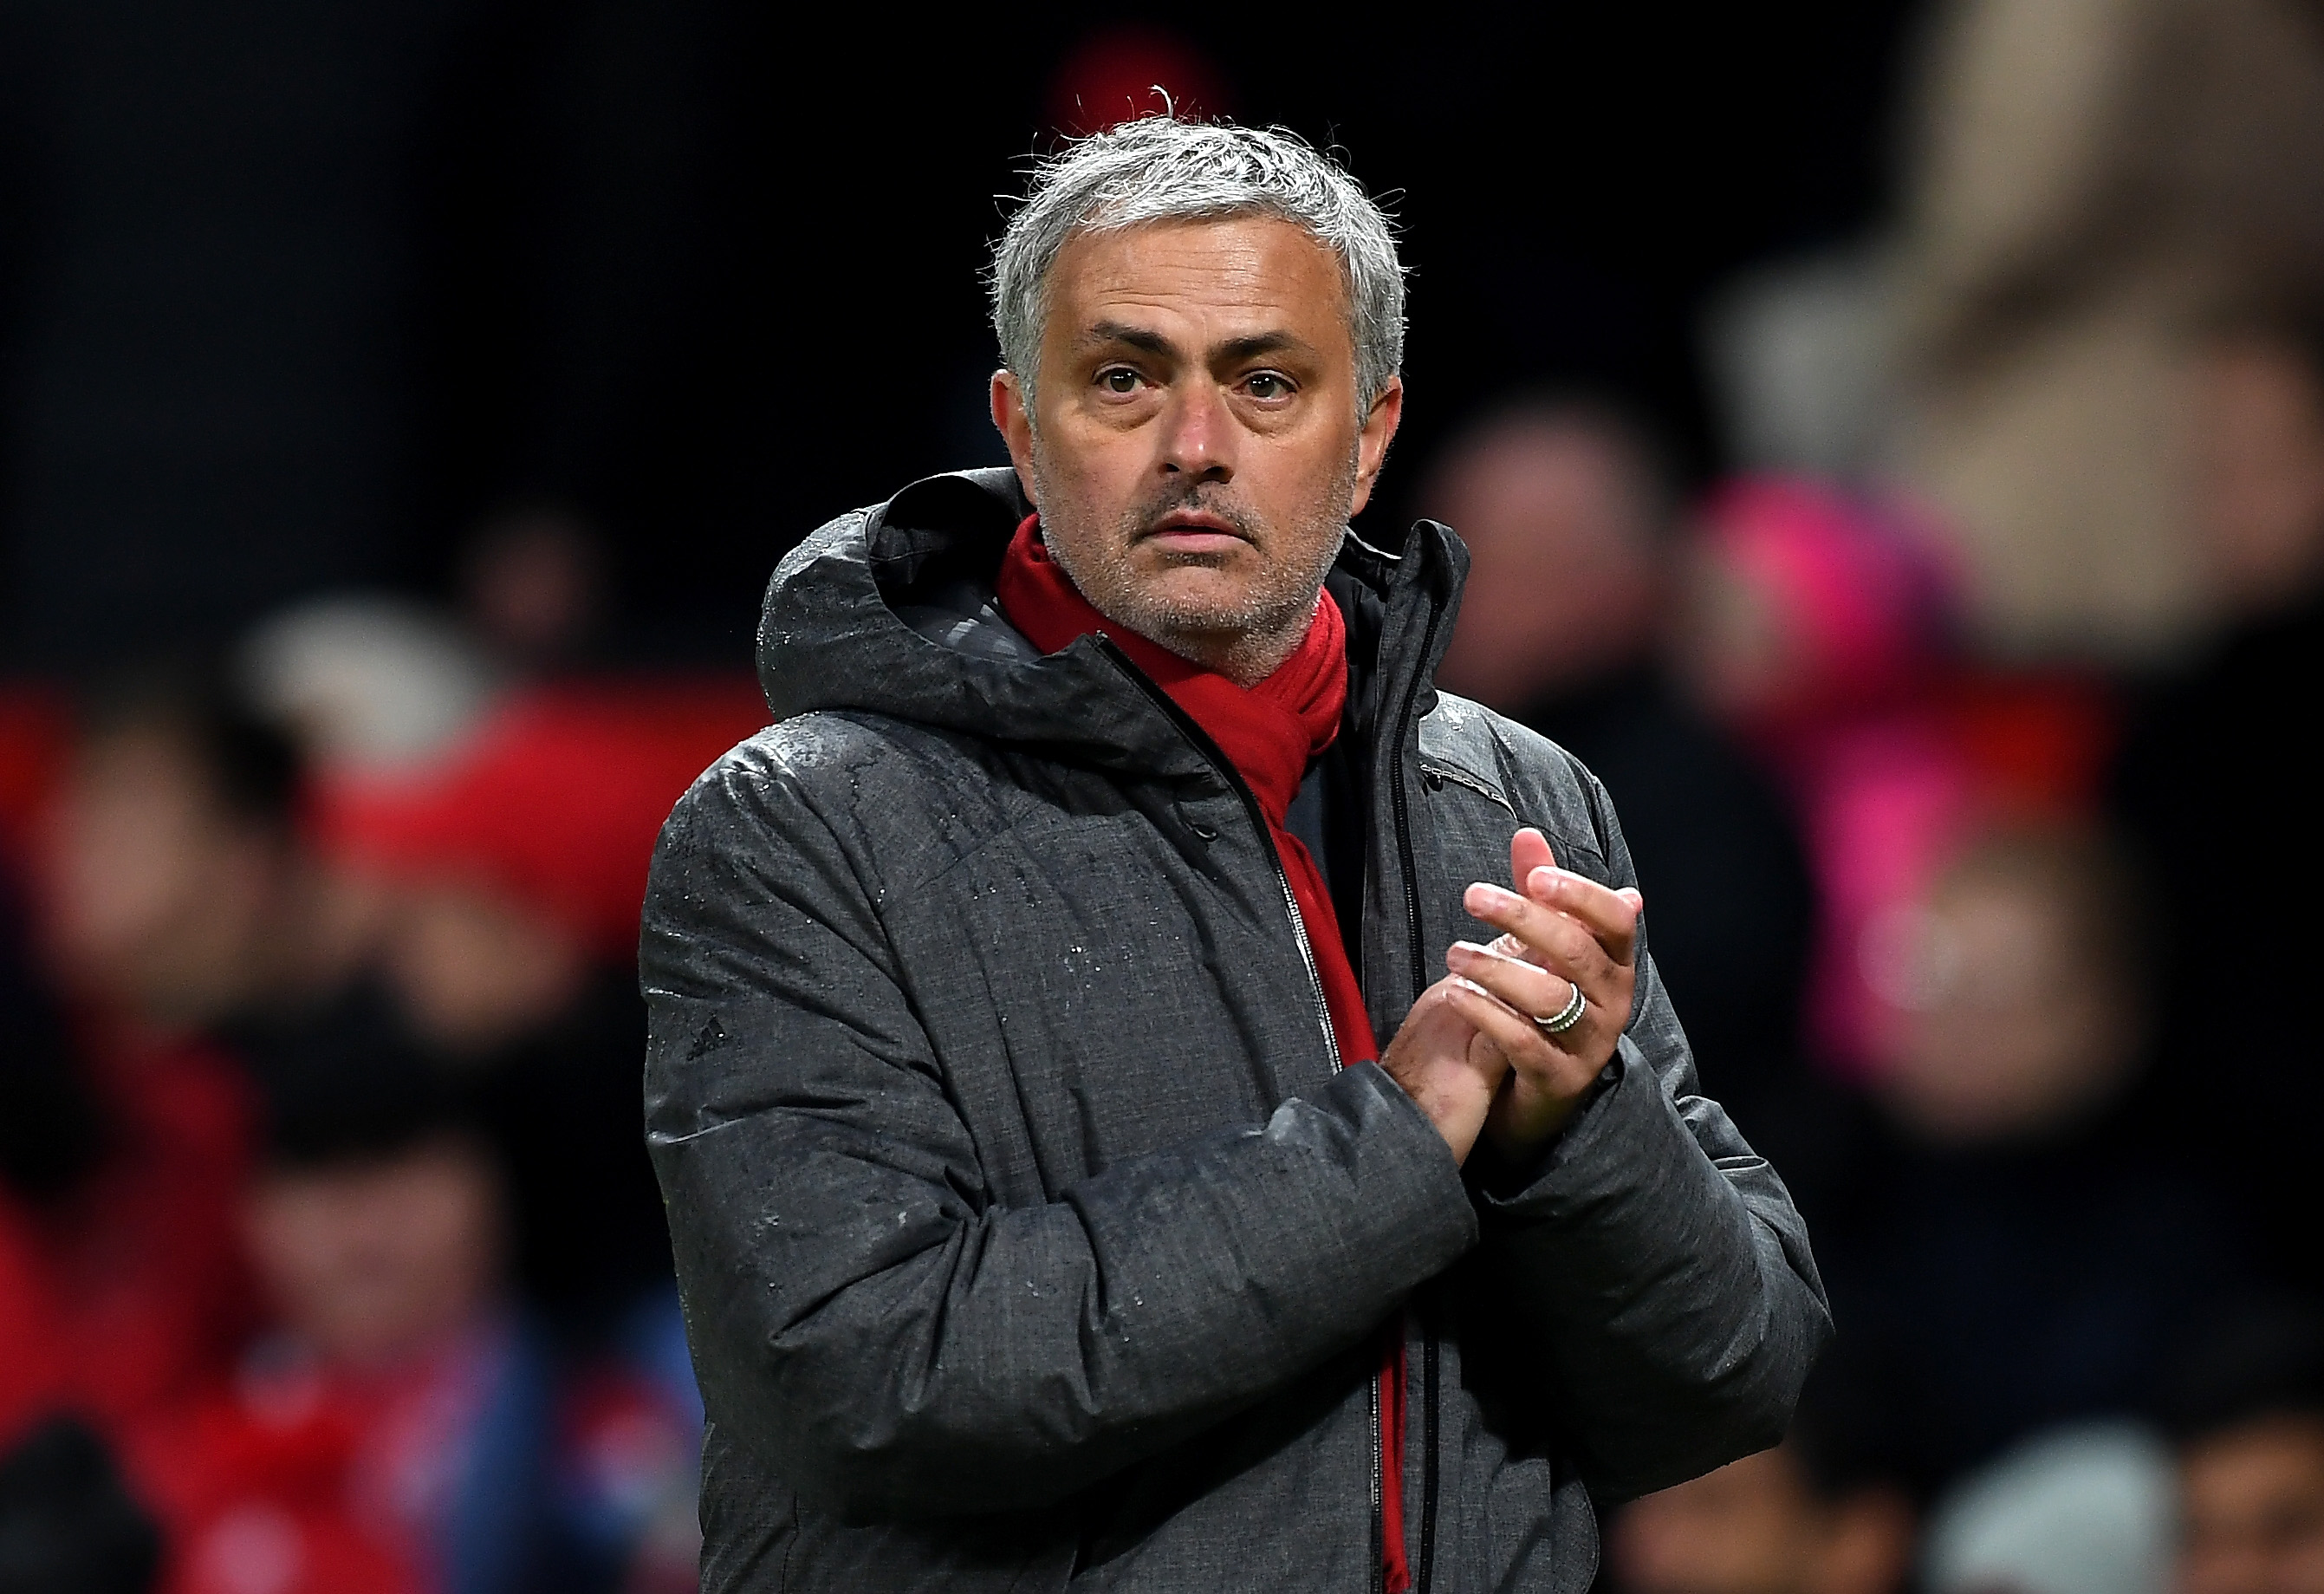 MANCHESTER, ENGLAND - JANUARY 15:  Jose Mourinho, Manager of Manchester United reacts after the full time whistle in the Premier League match between Manchester United and Stoke City at Old Trafford on January 15, 2018 in Manchester, England.  (Photo by Michael Regan/Getty Images)